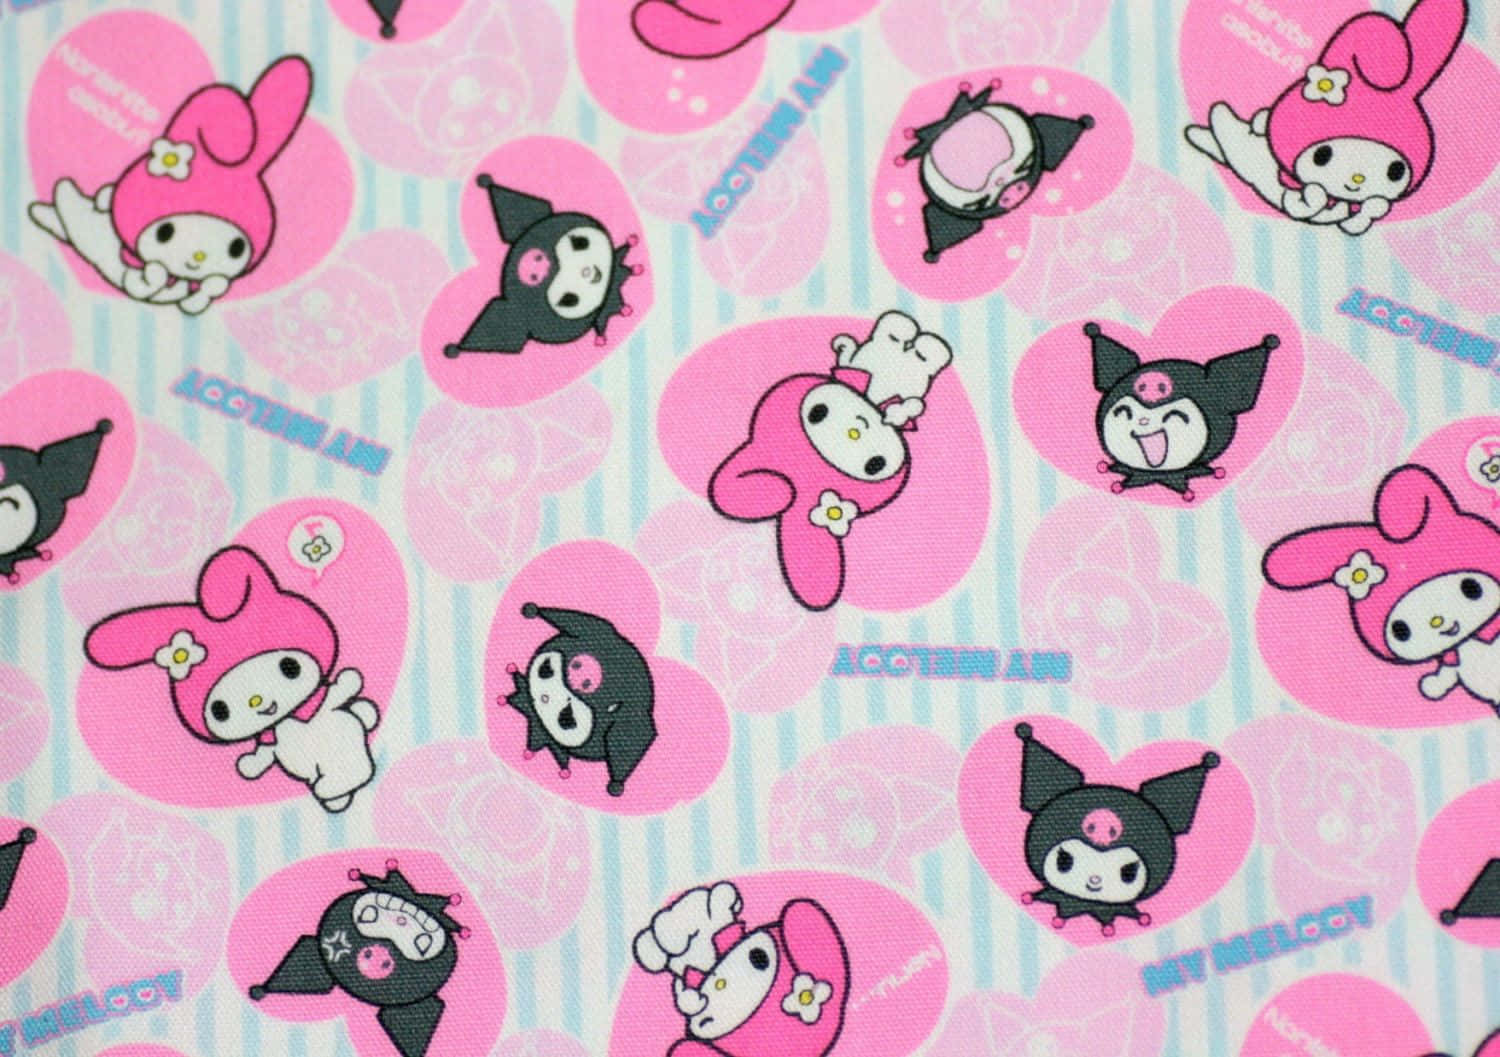 Get ready to take on the day with My Melody Laptop! Wallpaper